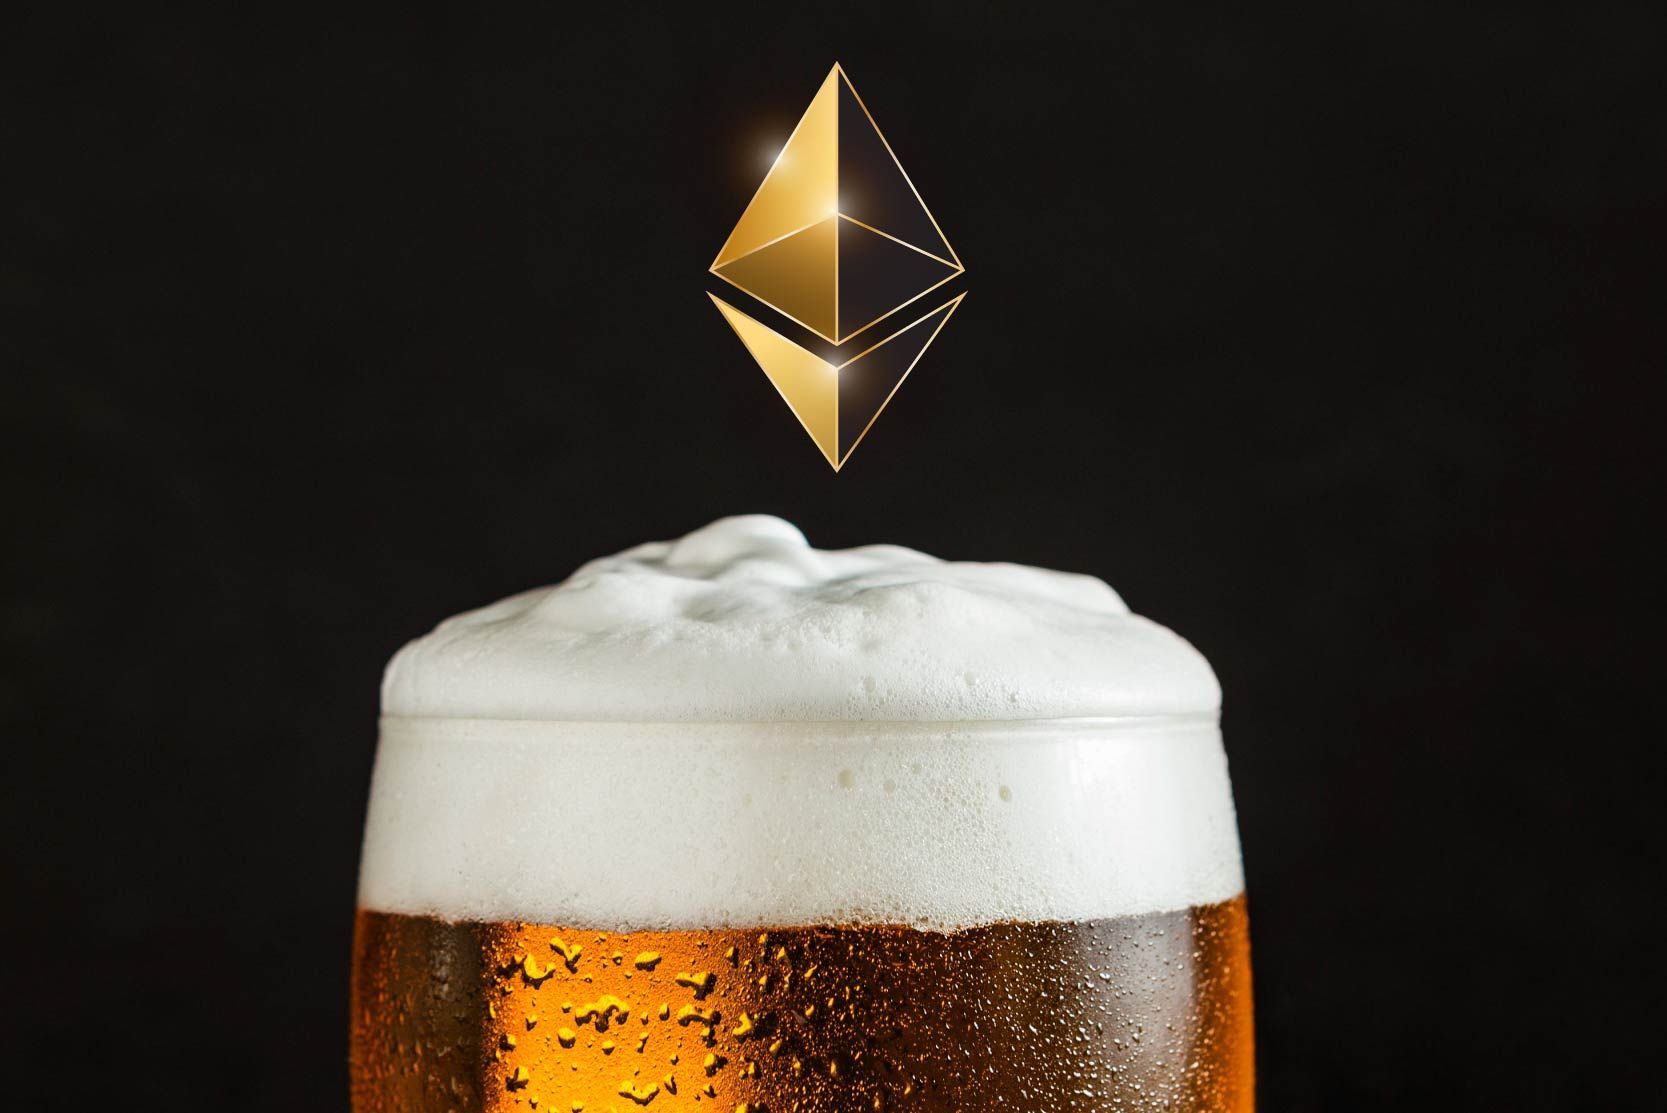 Budweiser bought the cryptocurrency domain Beer.Eth